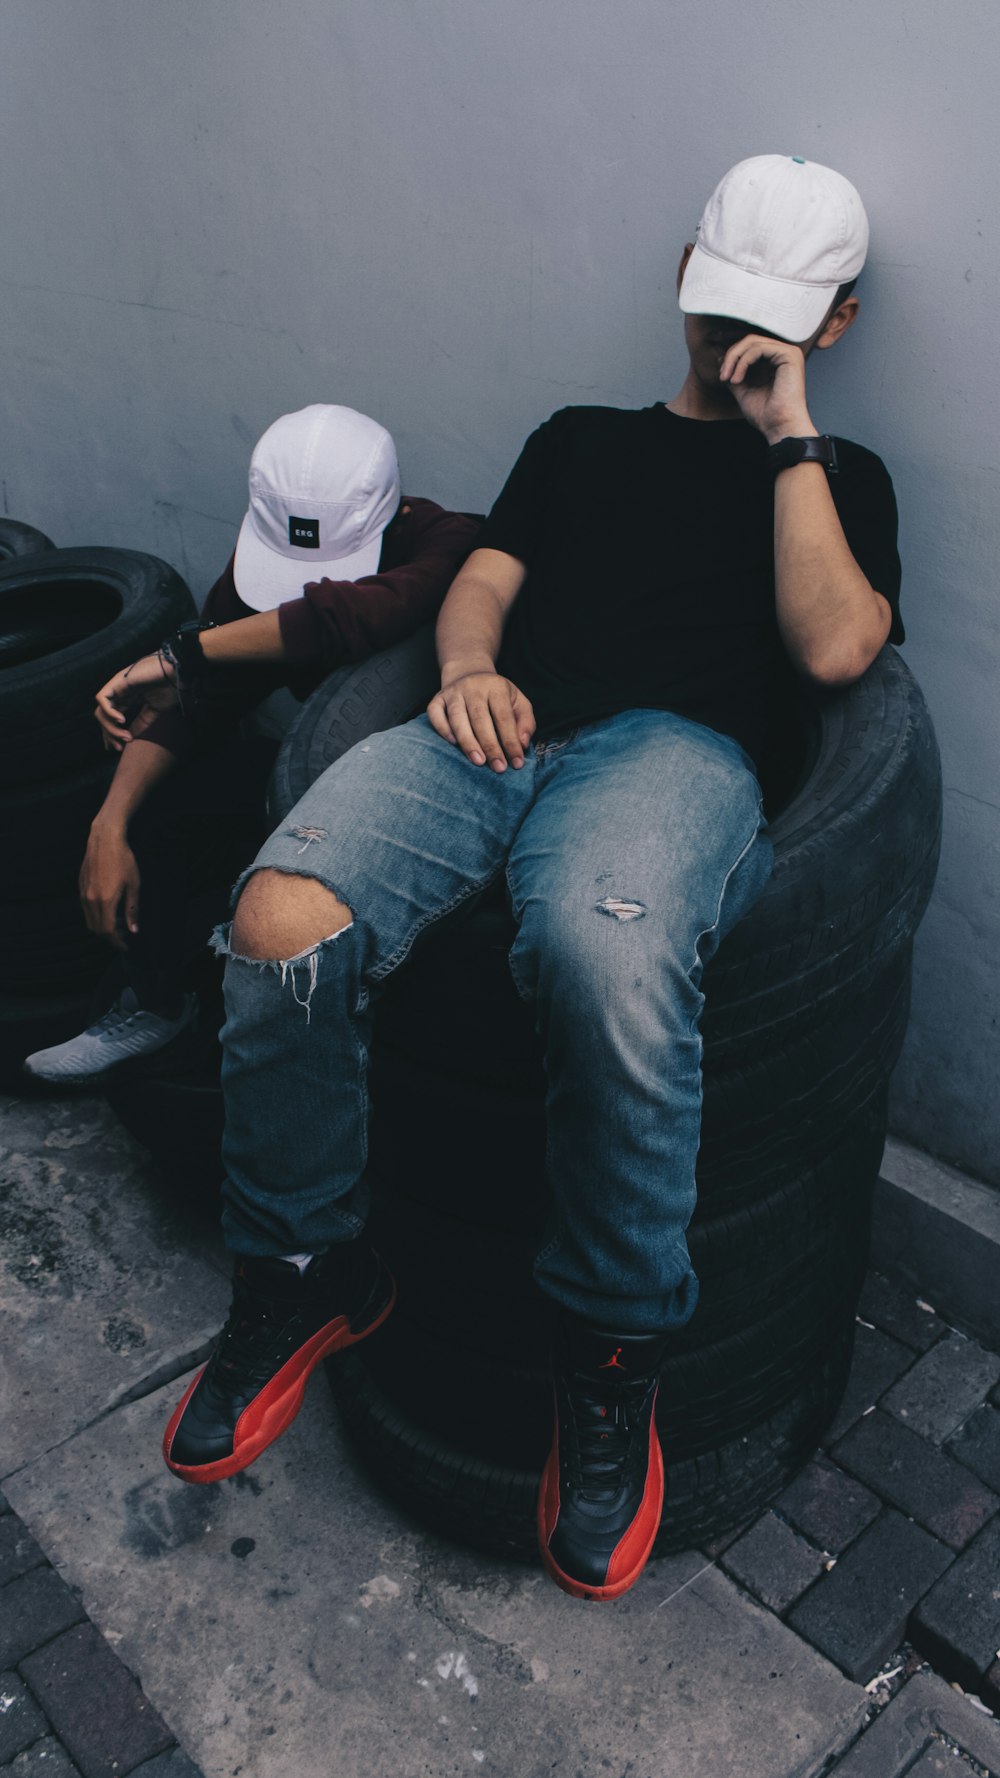 two people sitting on a tire talking on a cell phone